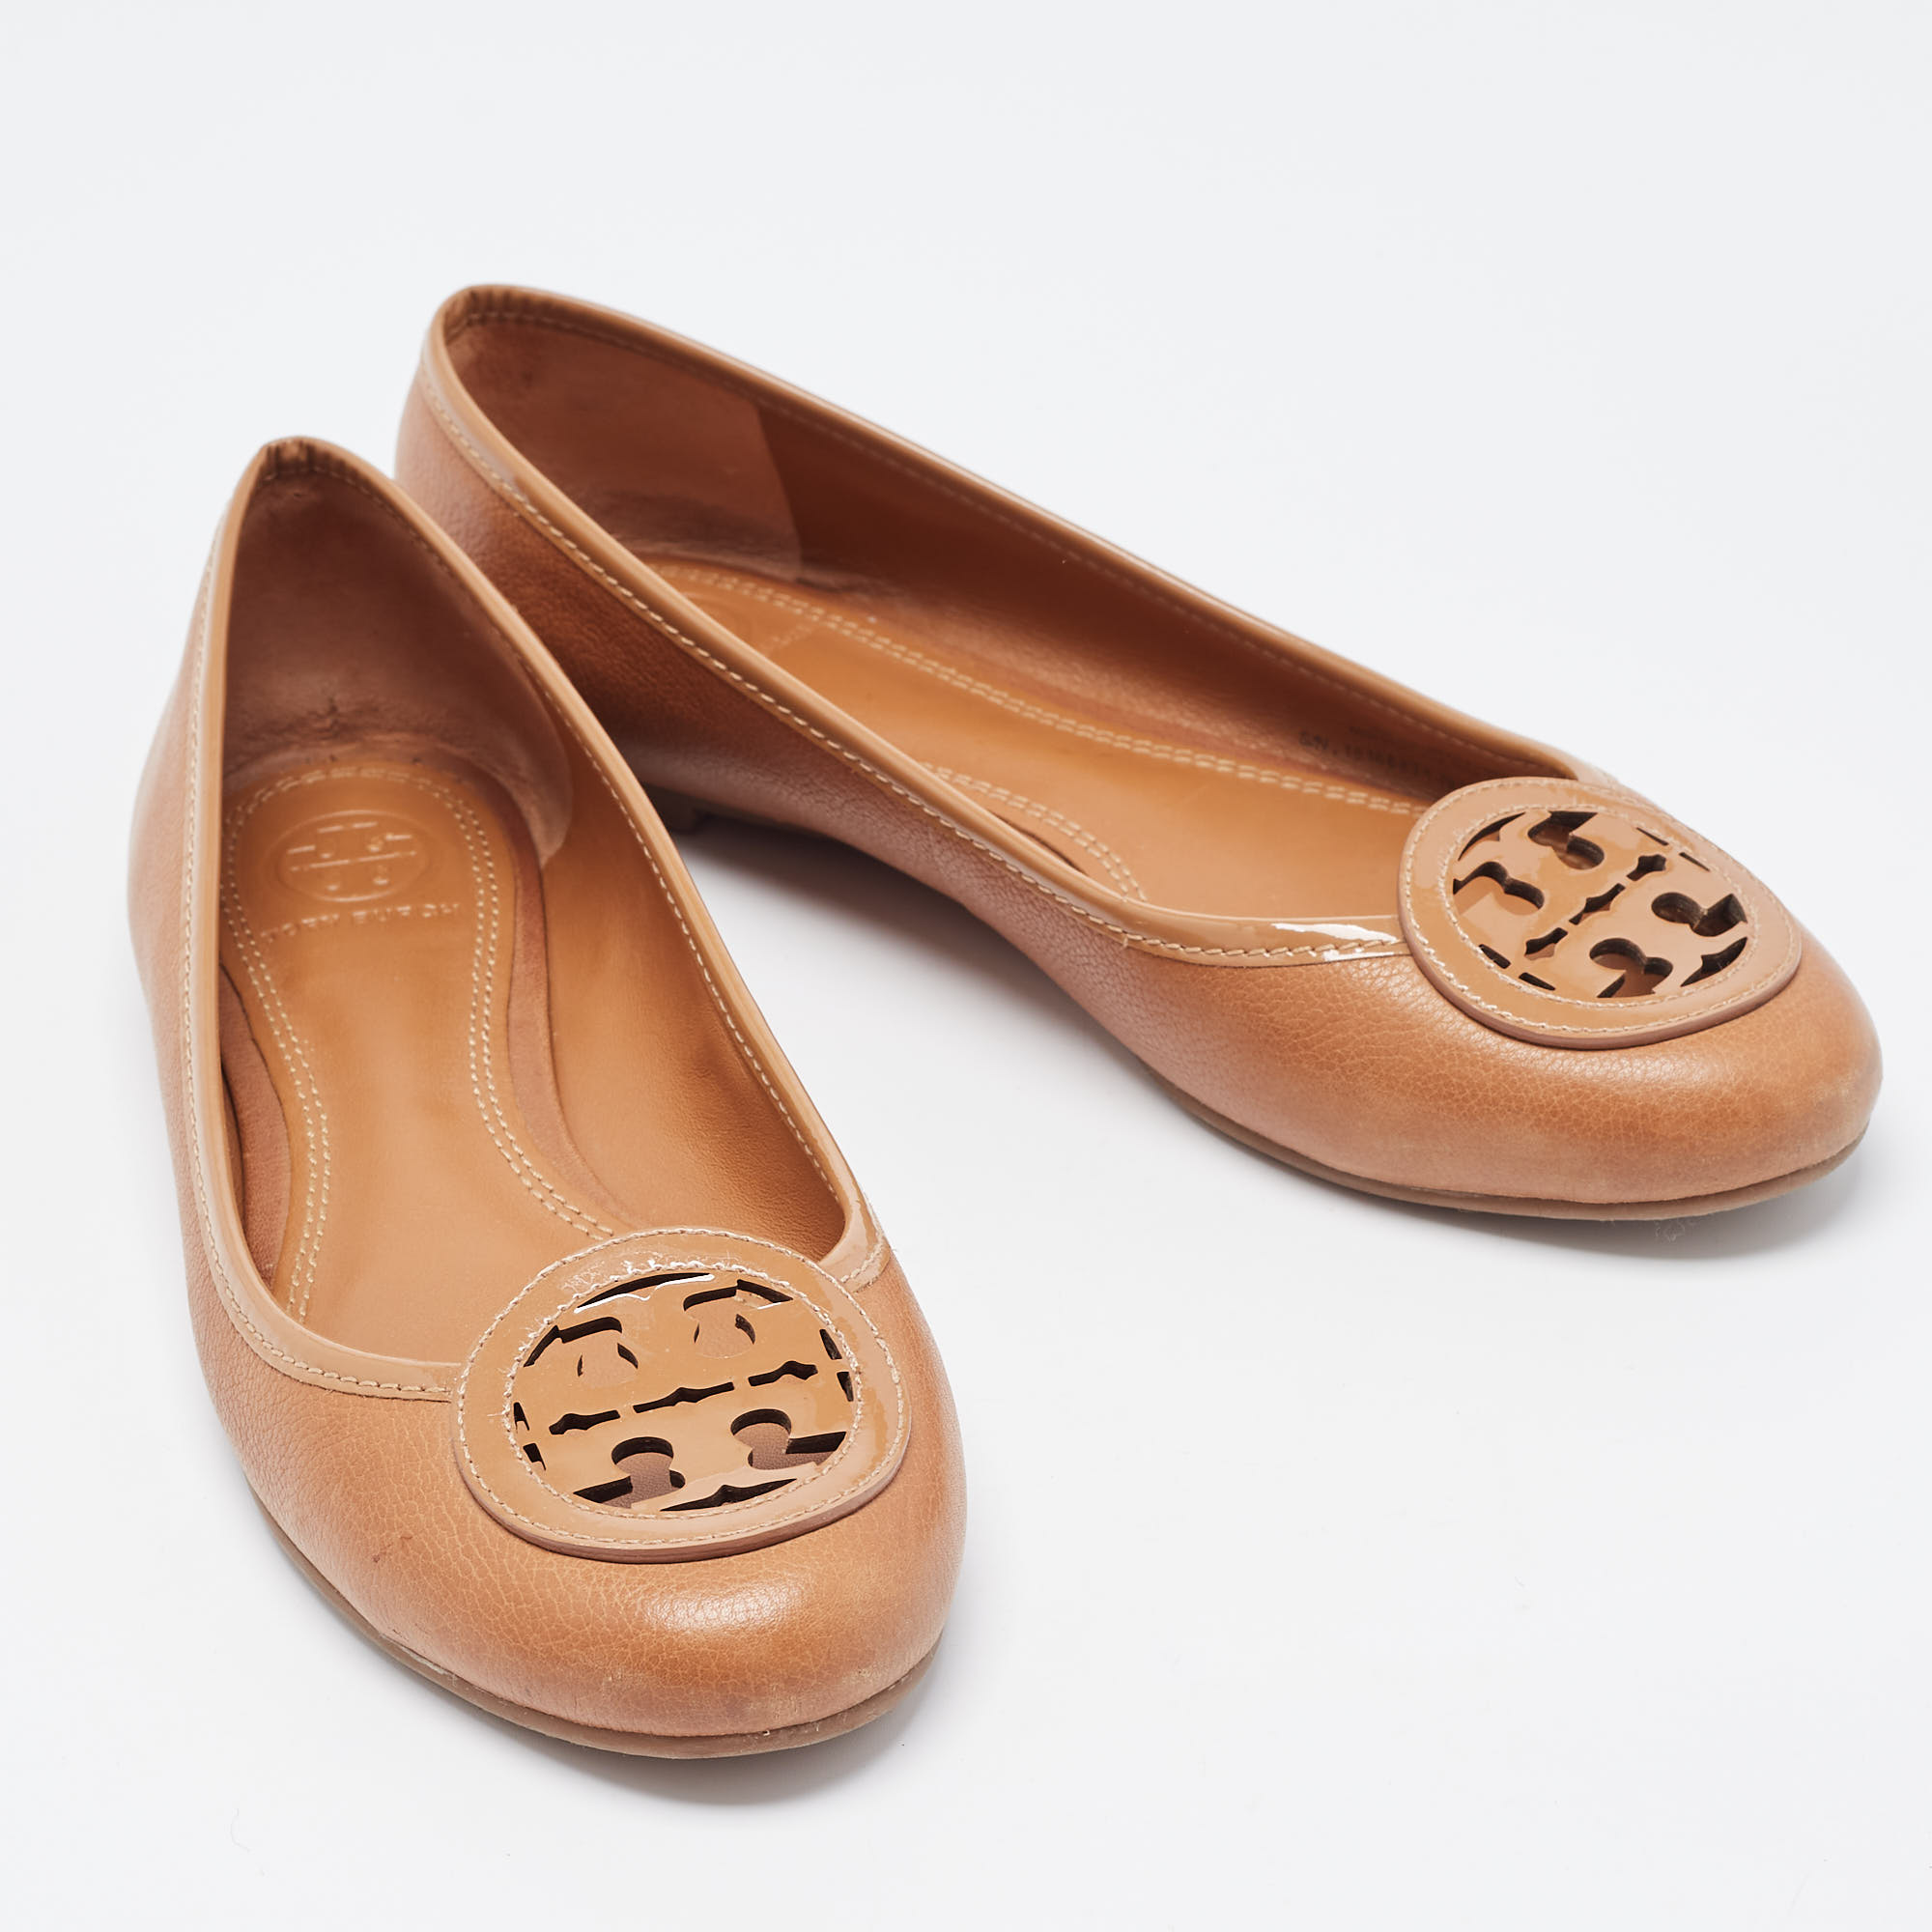 Tory Burch Brown Leather Lowell Ballet Flats Size 38